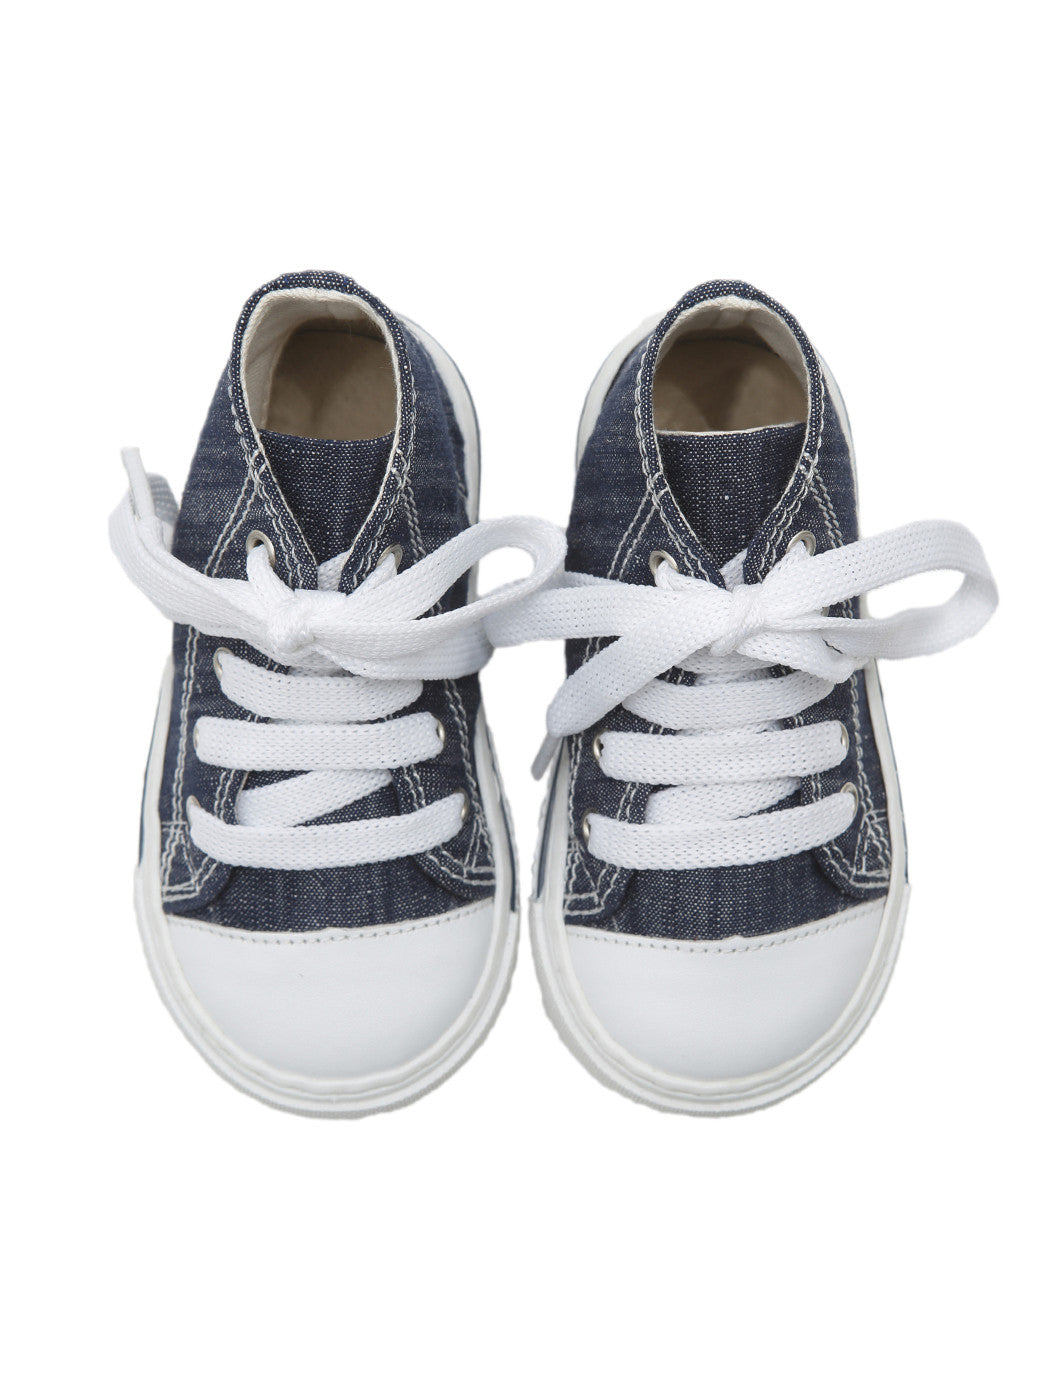 Baby bootie shoe for boy - GAS Blue